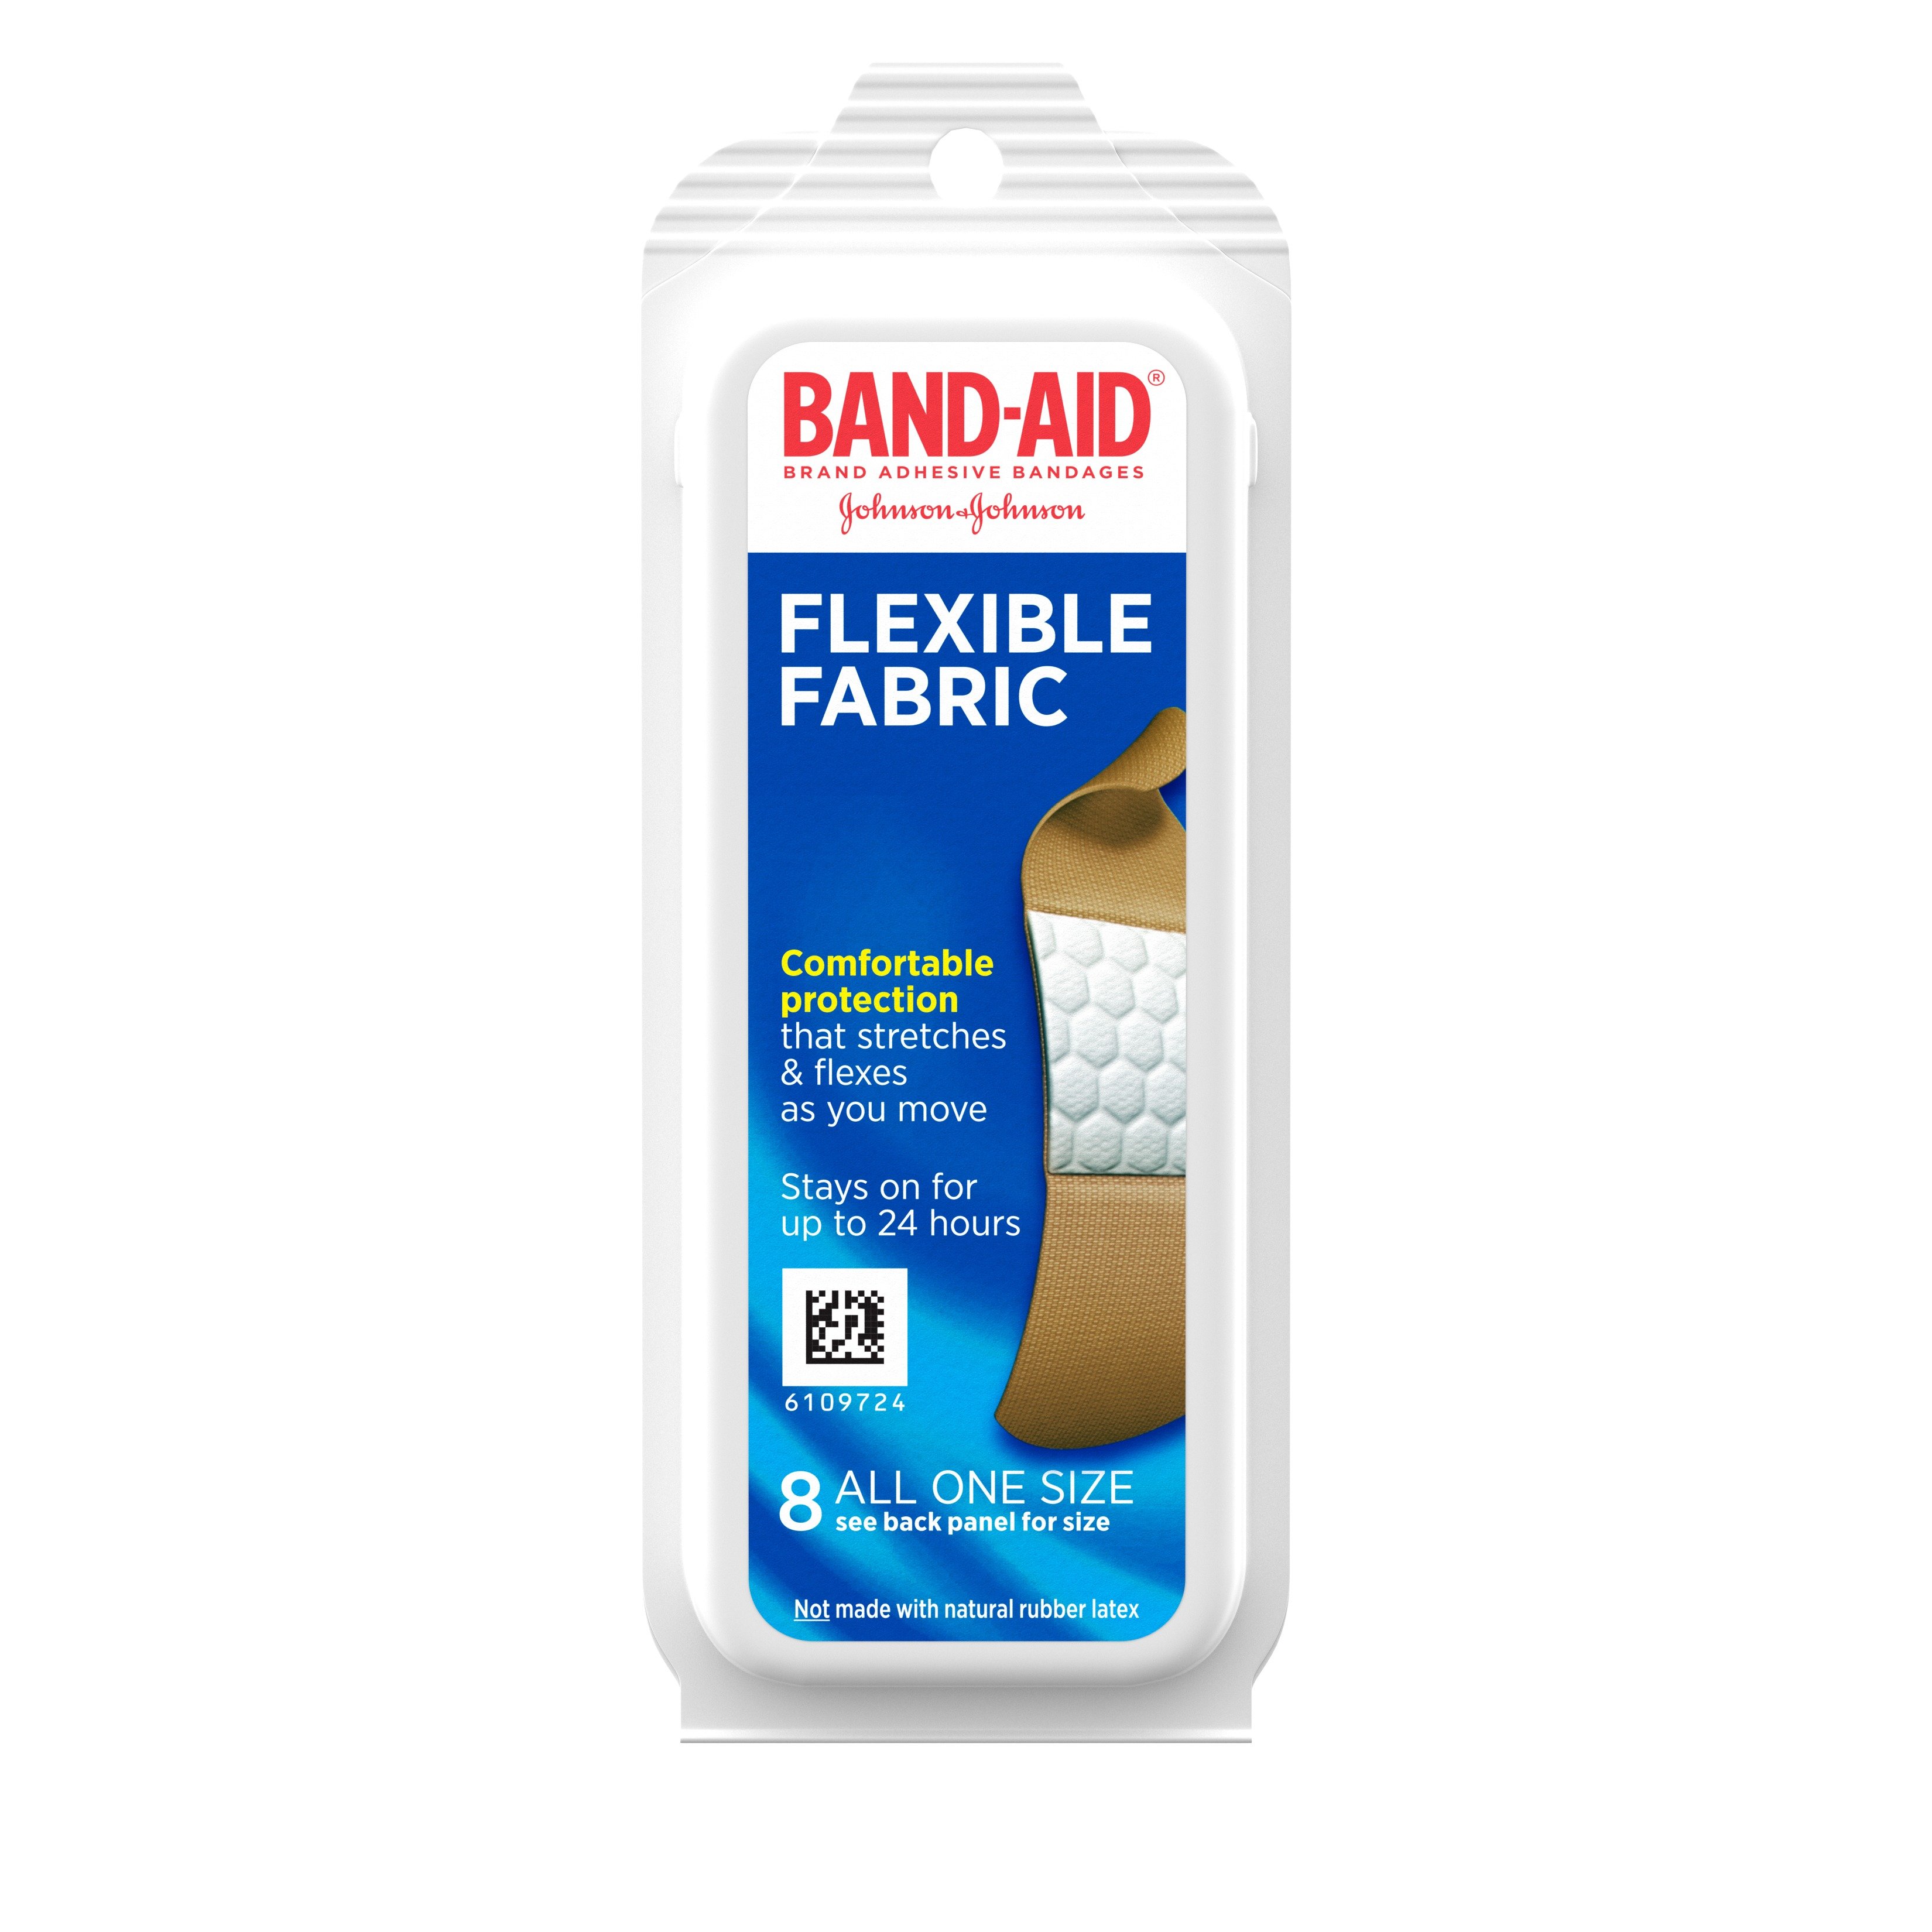 Flex-Fabric Bandages, Assorted, 100 count